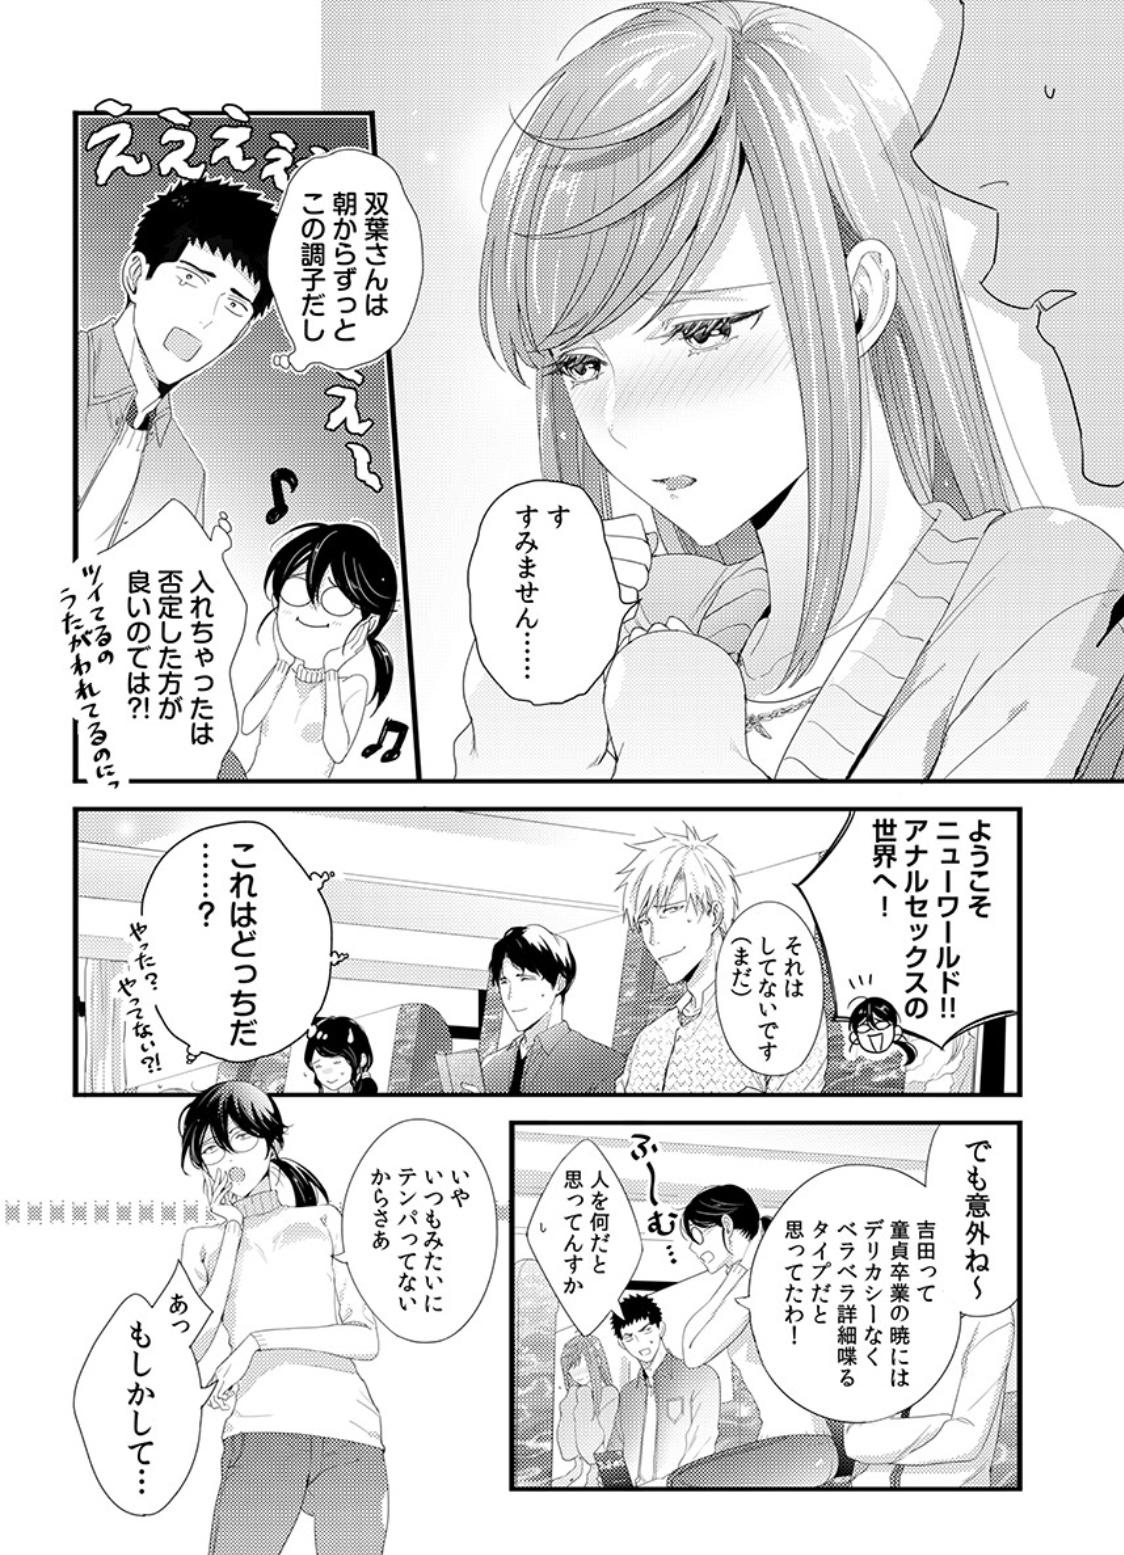 Please Let Me Hold You Futaba-San! Ch. 1+2 30